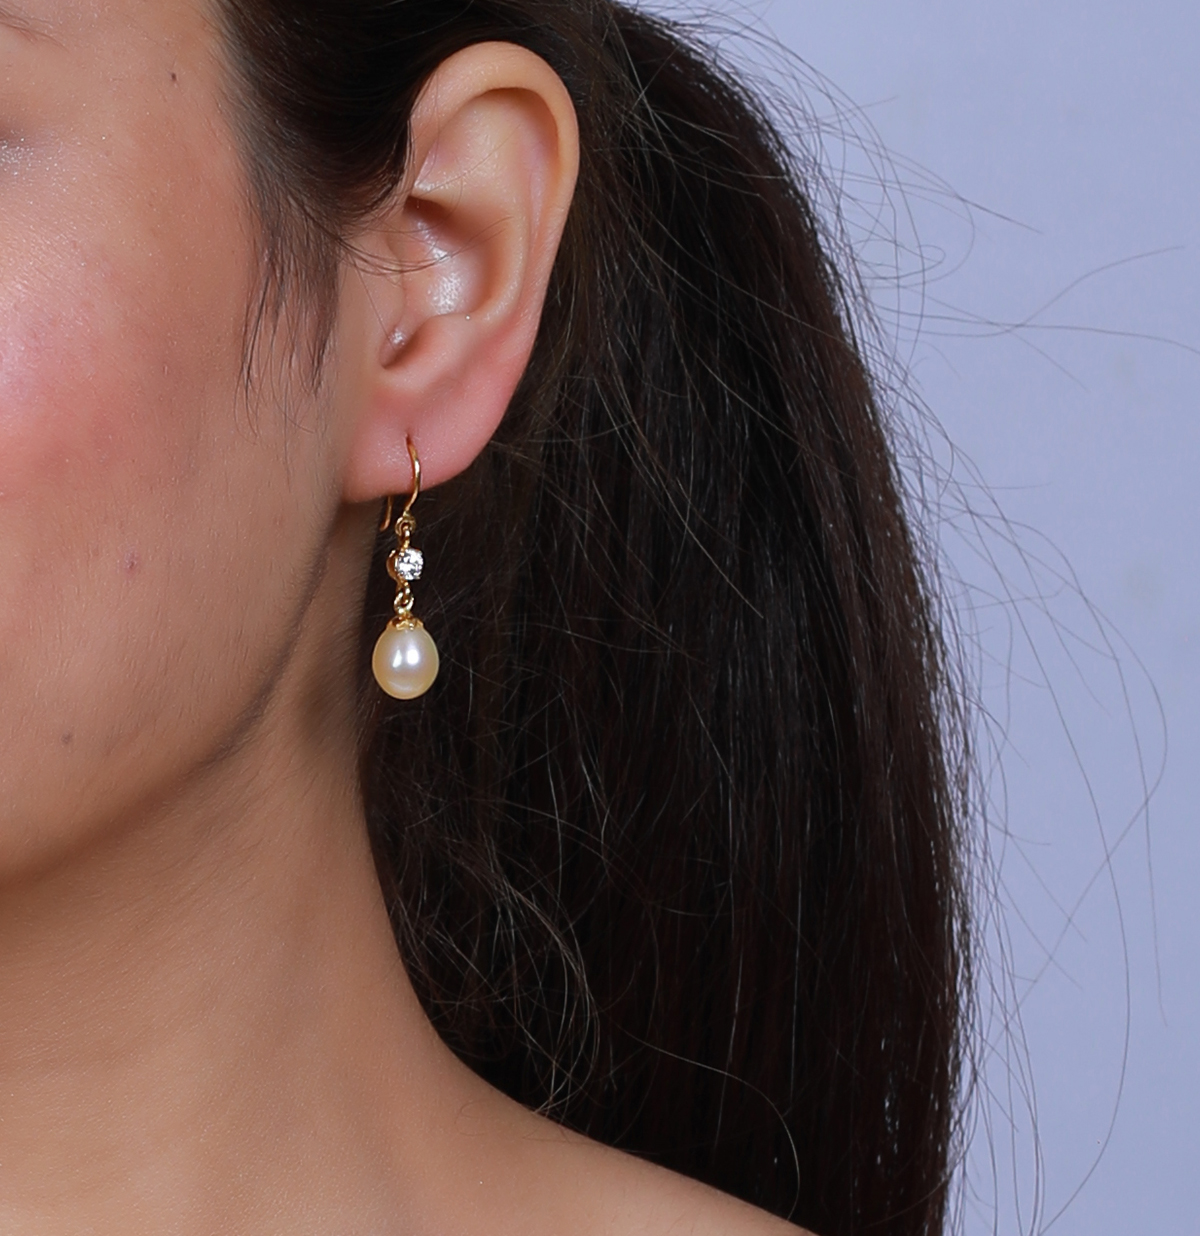 Mia by Tanishq 18 KT Yellow Gold Nature Inspired drop Earrings Yellow Gold  14kt Drop Earring Price in India - Buy Mia by Tanishq 18 KT Yellow Gold  Nature Inspired drop Earrings